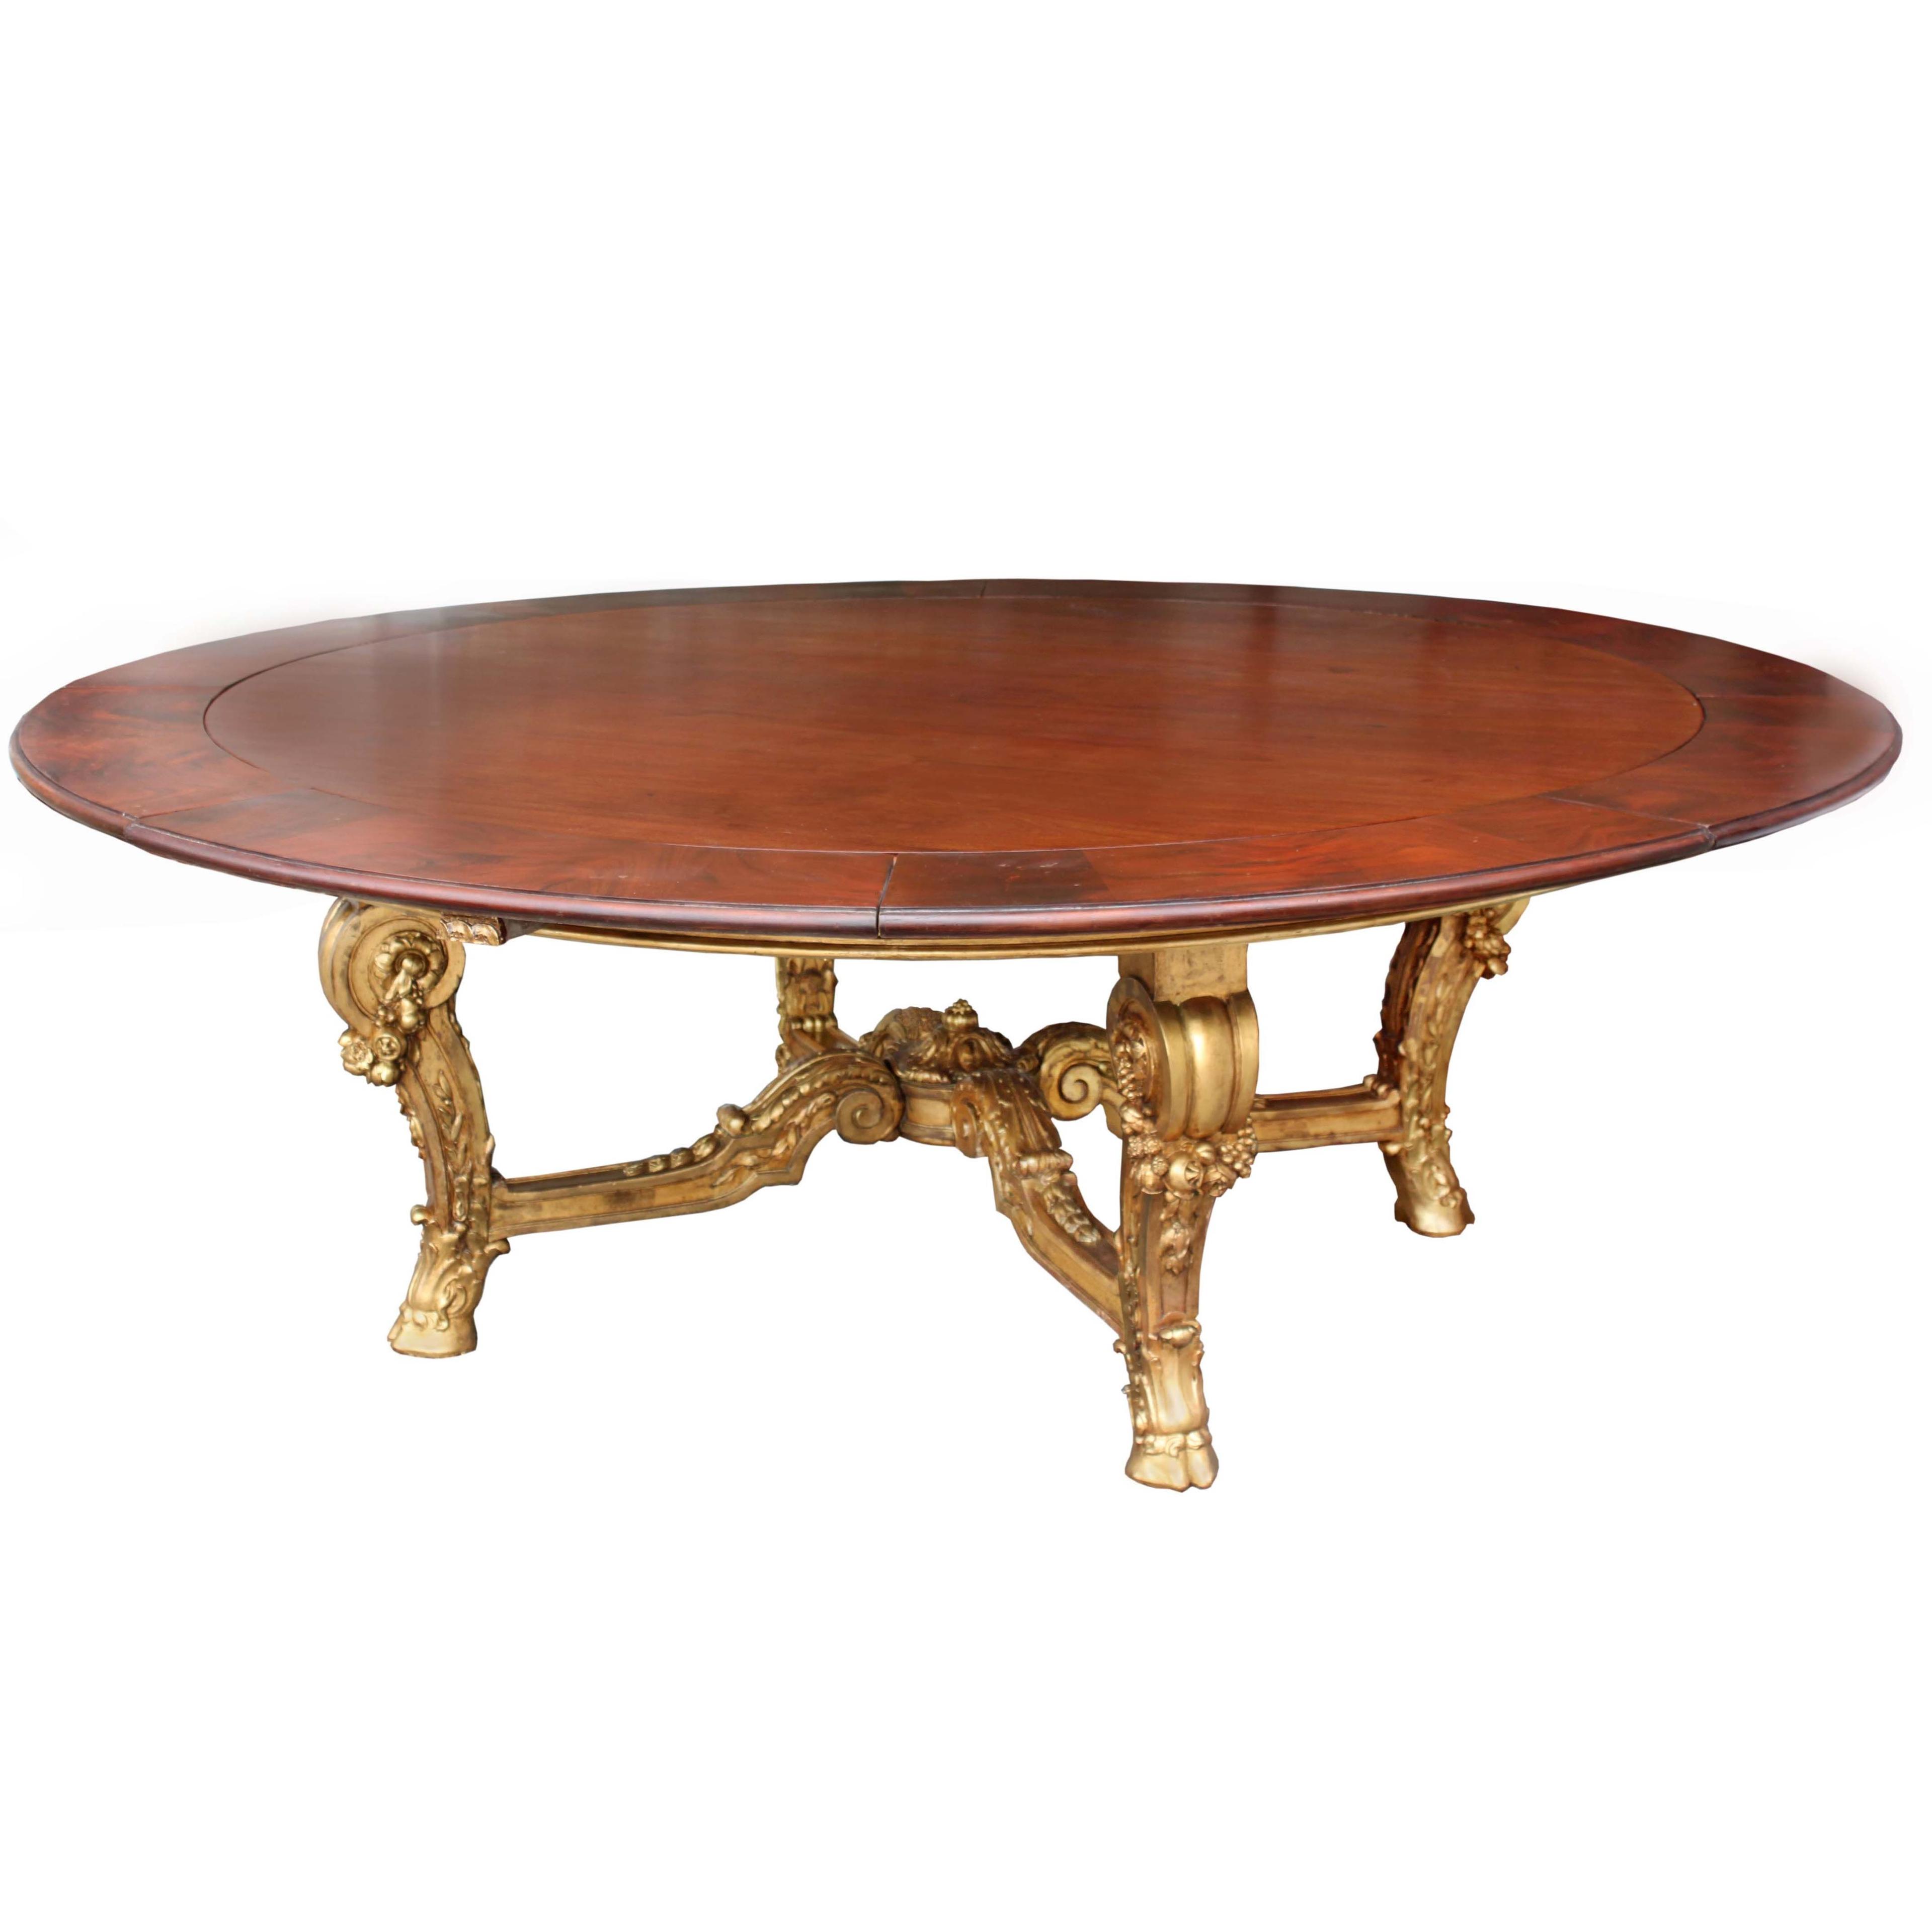 Large Giltwood Round Table in Louis XV Style